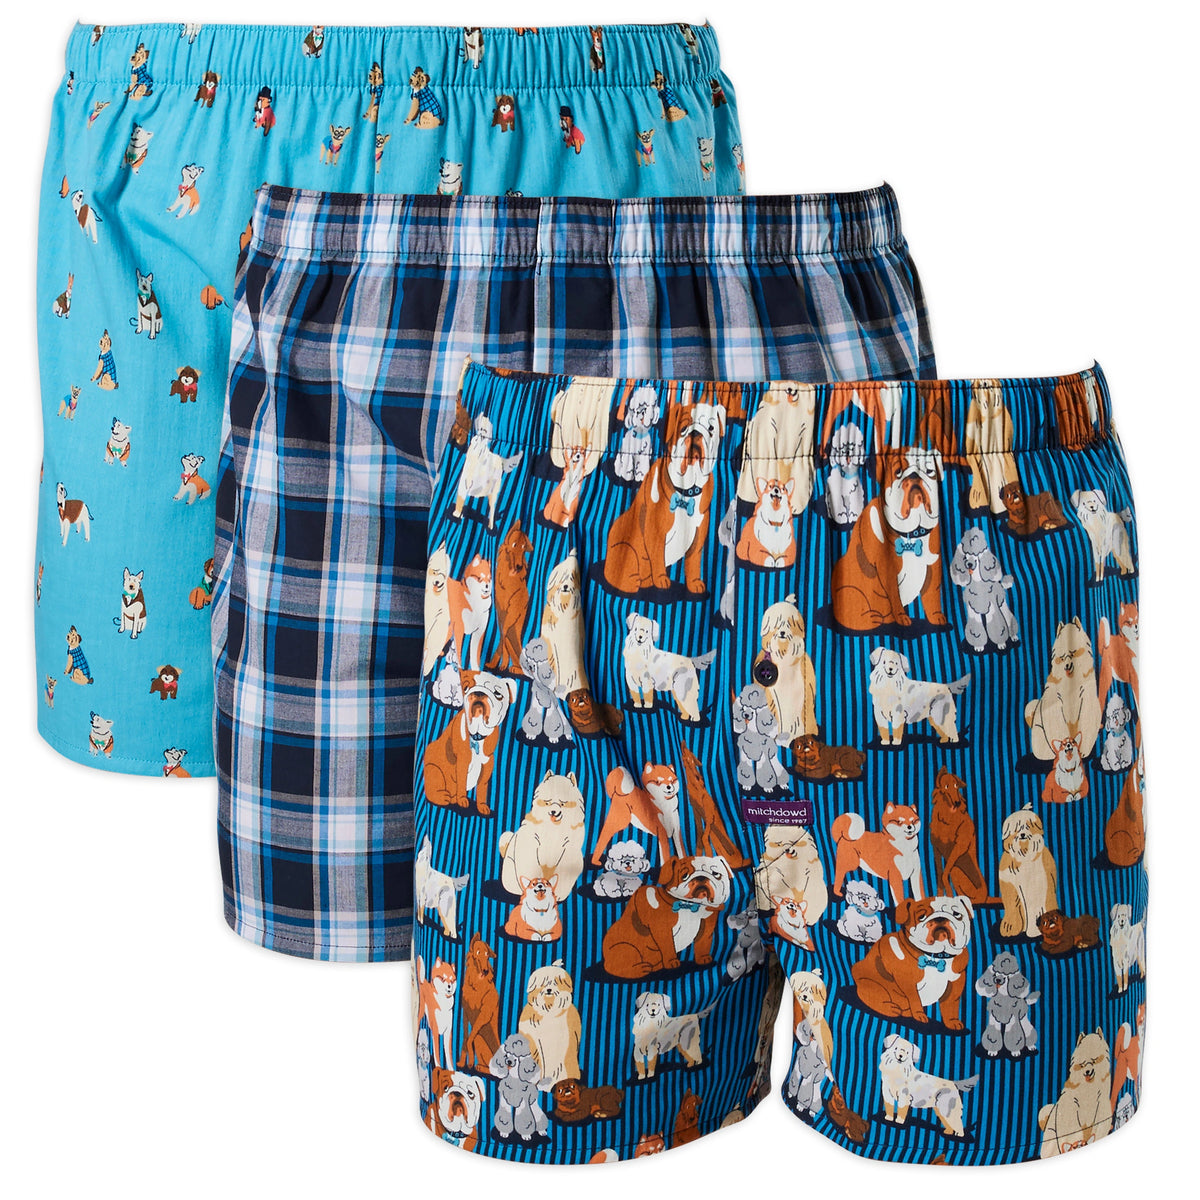 Mitch Dowd Men's Dressed Up Dogs Cotton Boxer Shorts 3 Pack Boxer Shorts  Shop Online Today.